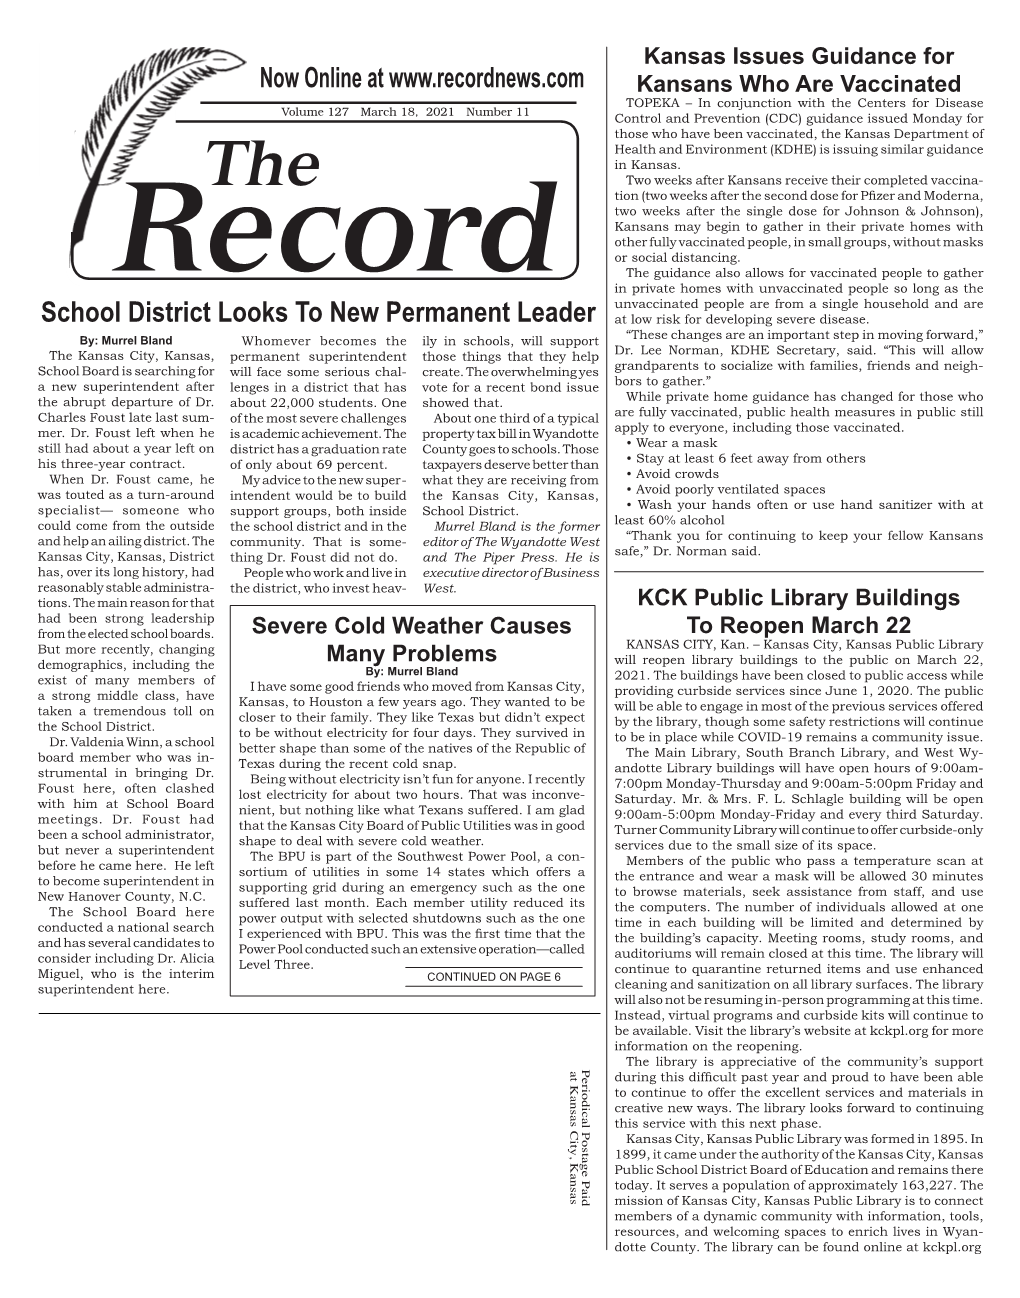 The Record – March 18, 2021